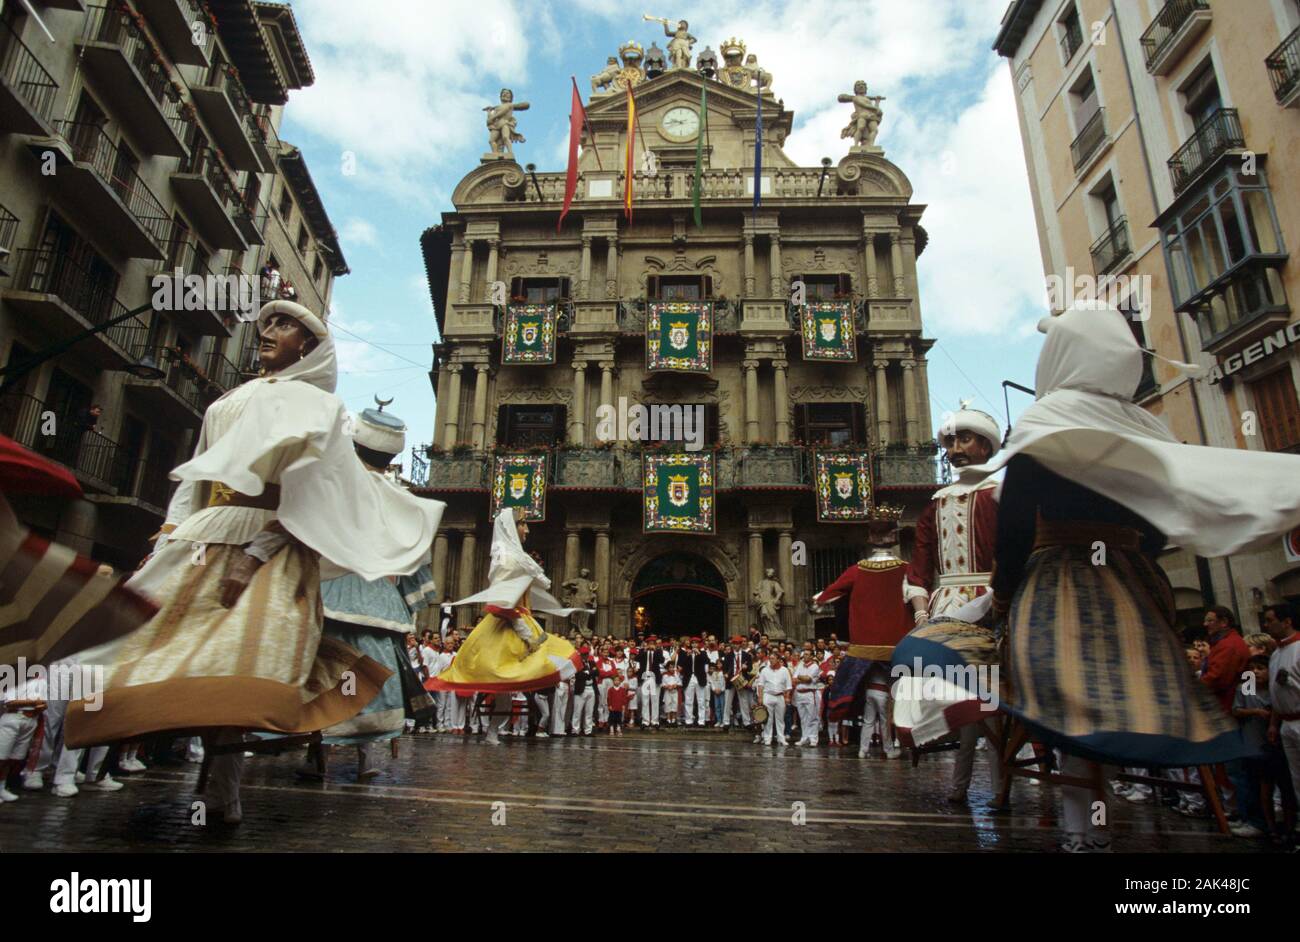 Northern Spain: Pamplona - Dancers with giant puppets in front of the town hall | usage worldwide Stock Photo